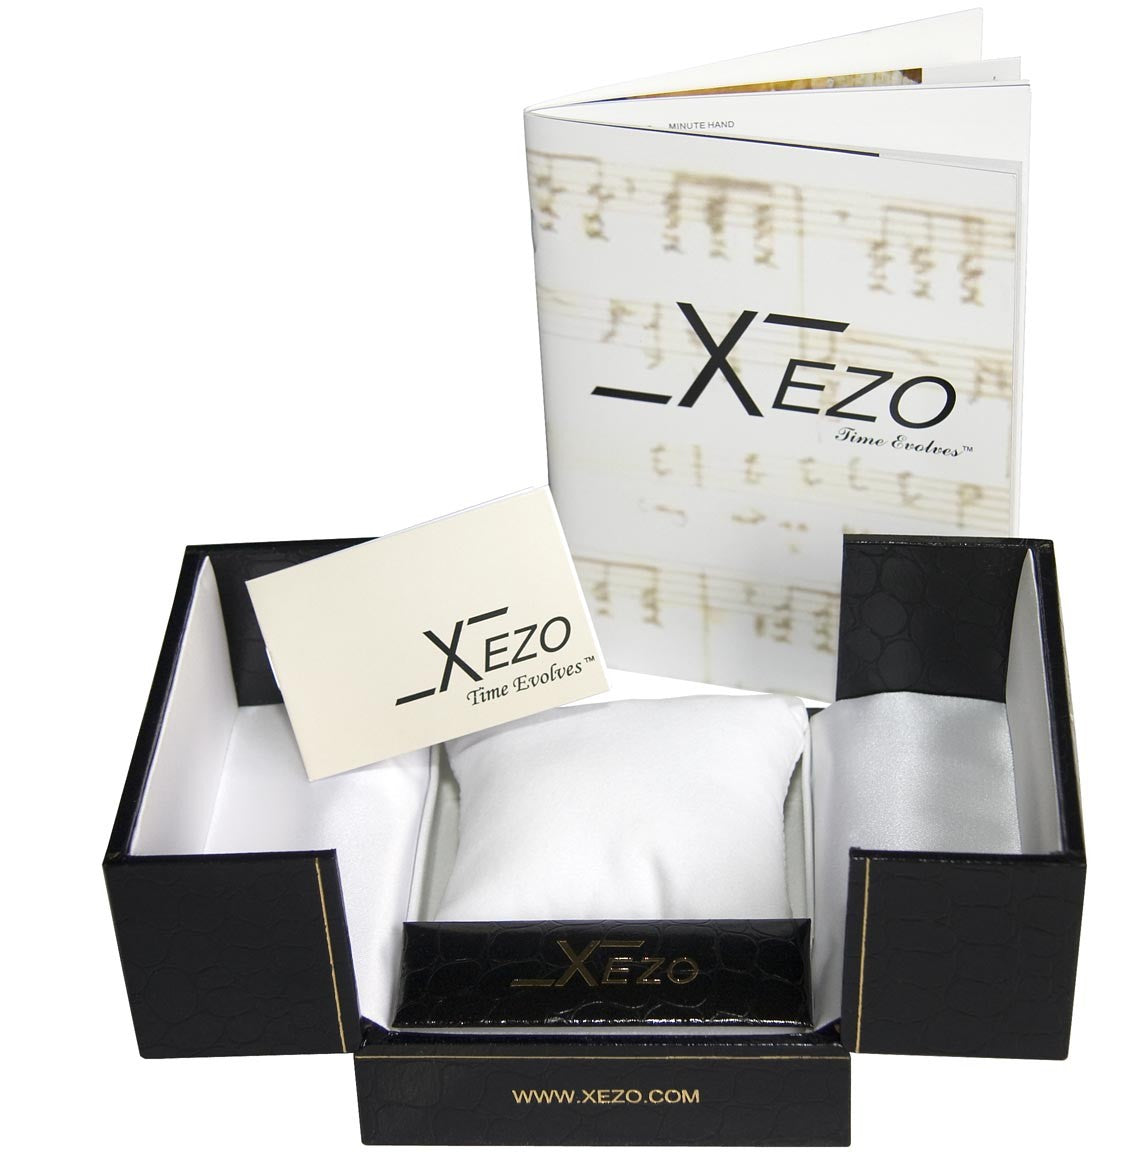 Xezo - Black gift box, certificate, and the manual of the Architect 2001 BL watch